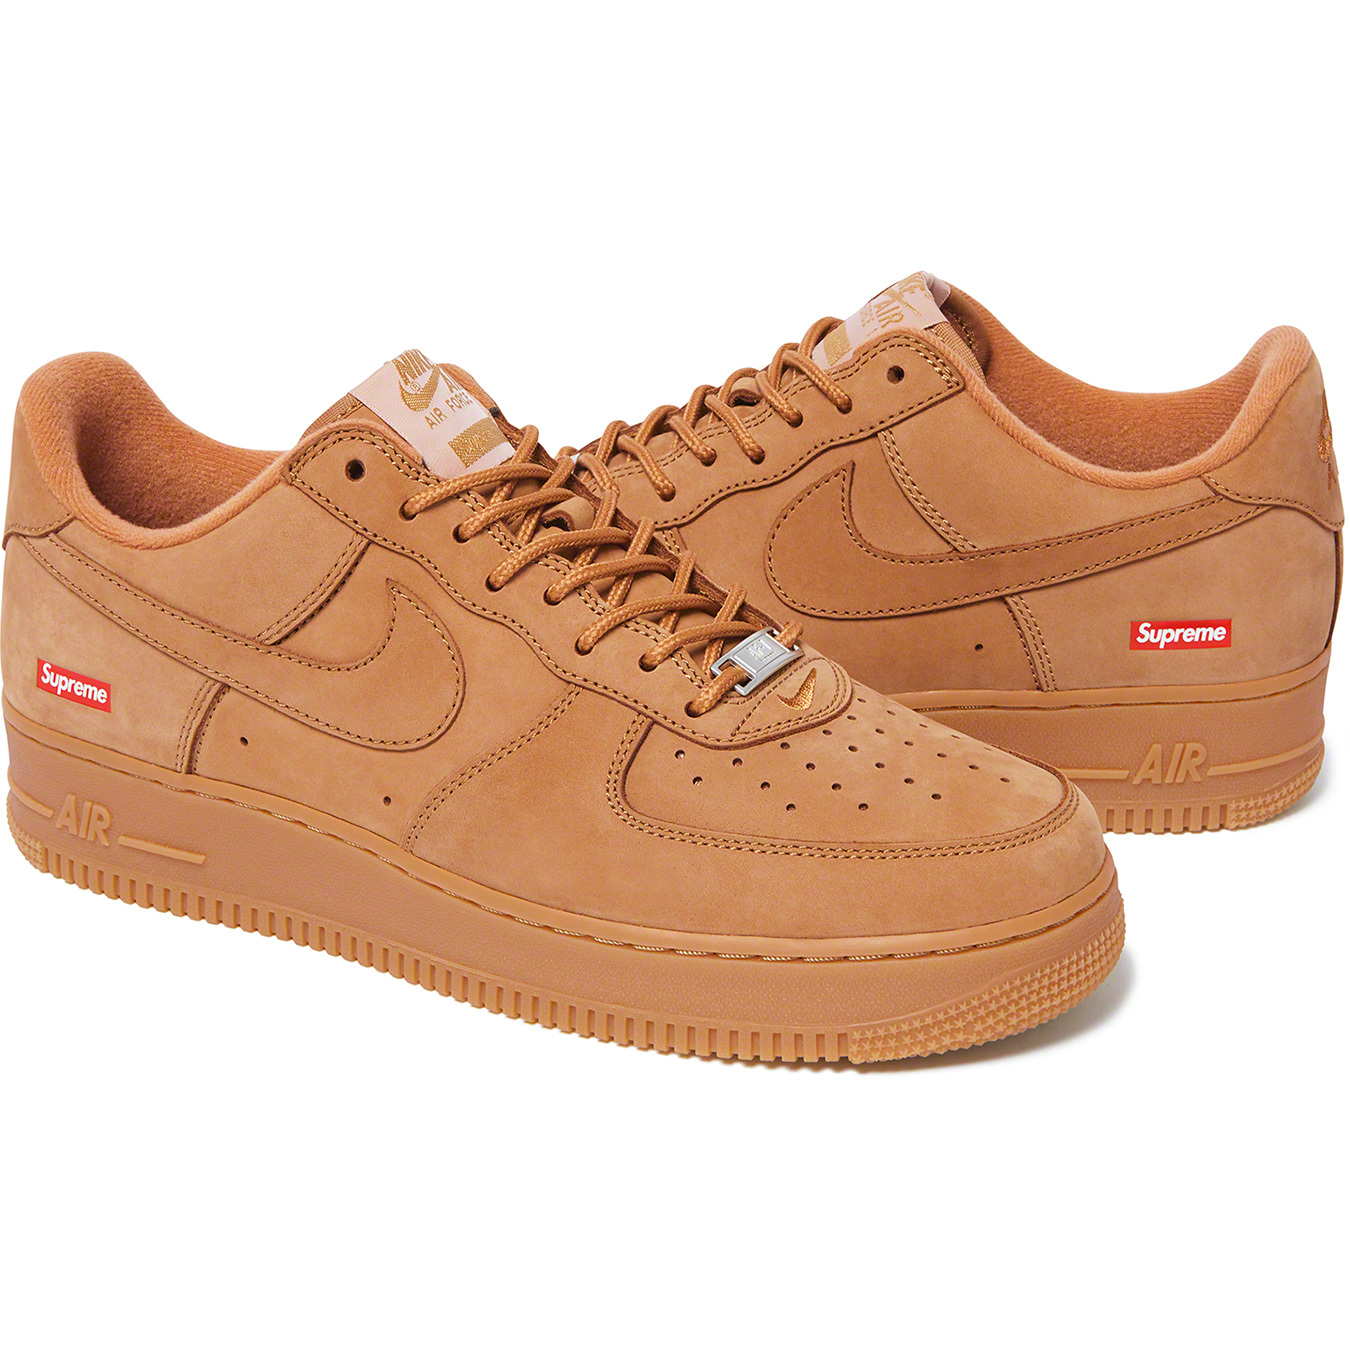 Nike Air Force 1 Low Wheat - fall winter 2021 - Supreme